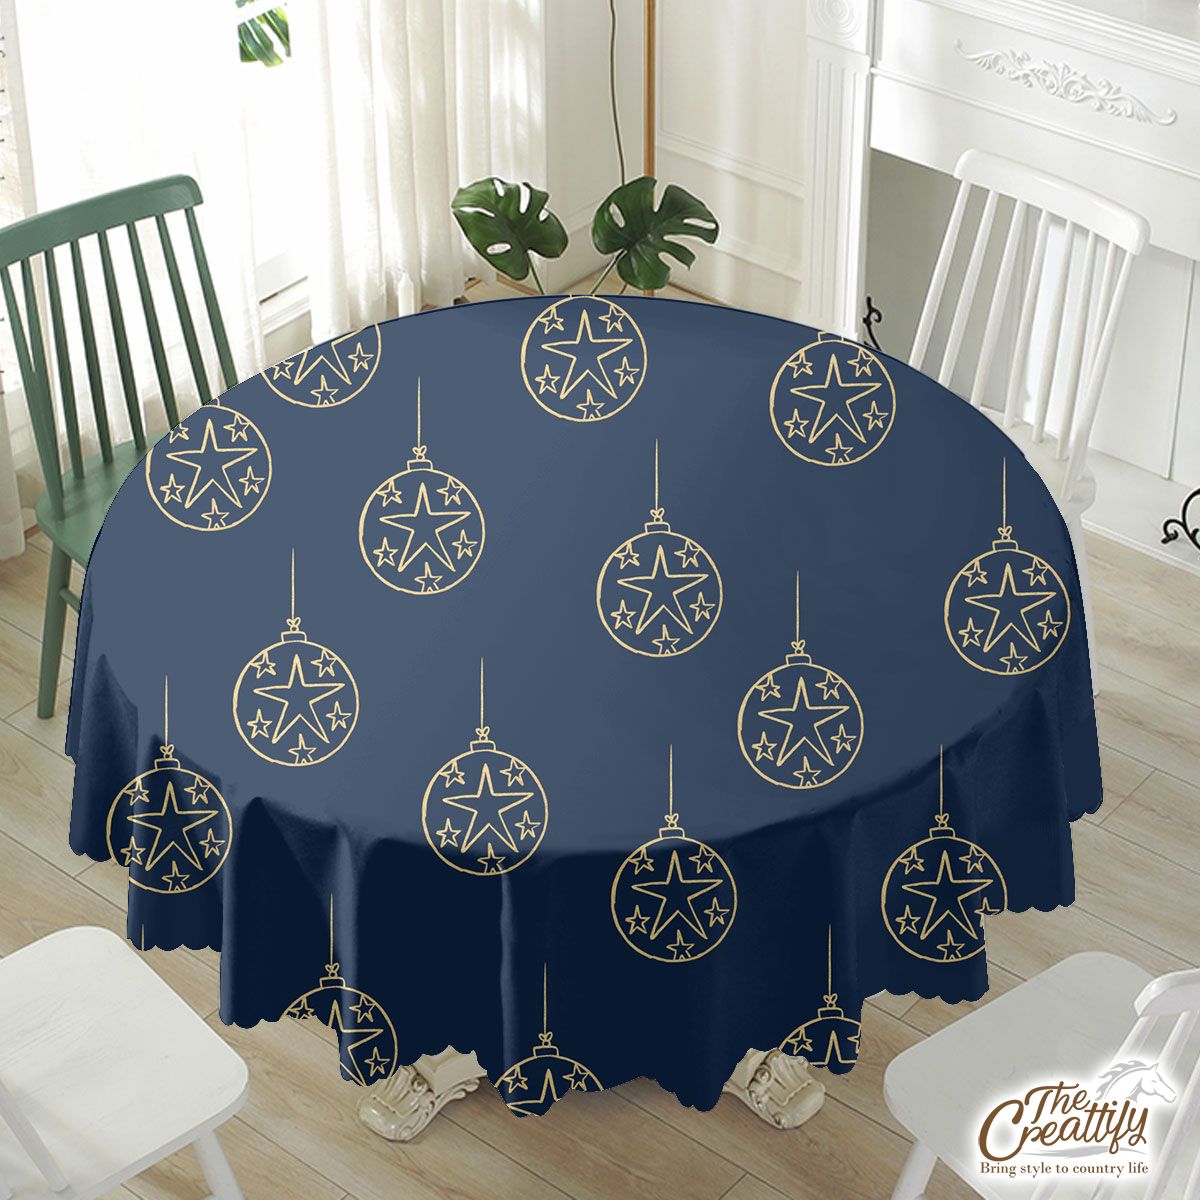 Christmas Balls With Stars Seamless Pattern Waterproof Tablecloth